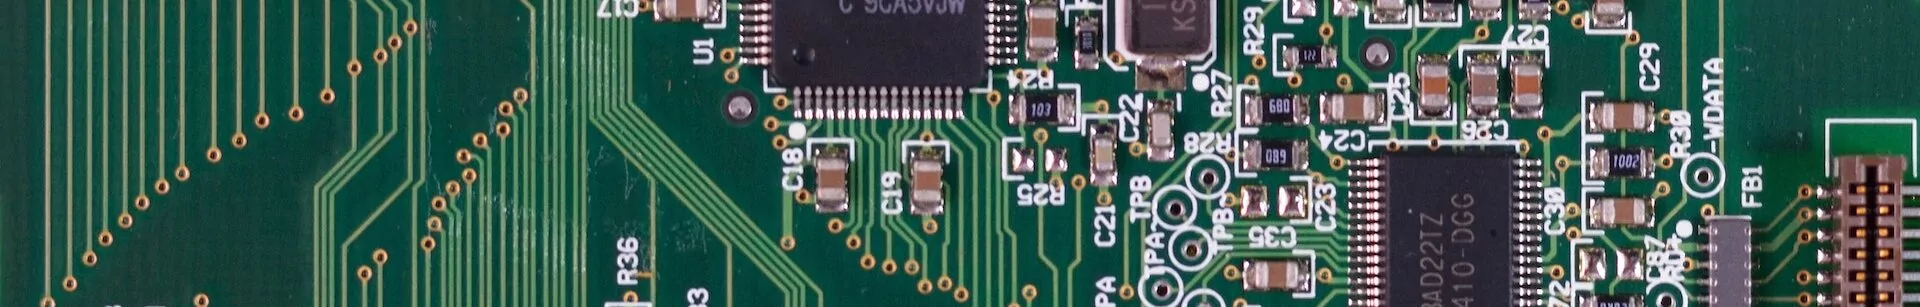 A circuit board, an integral part of any job requiring IT certifications